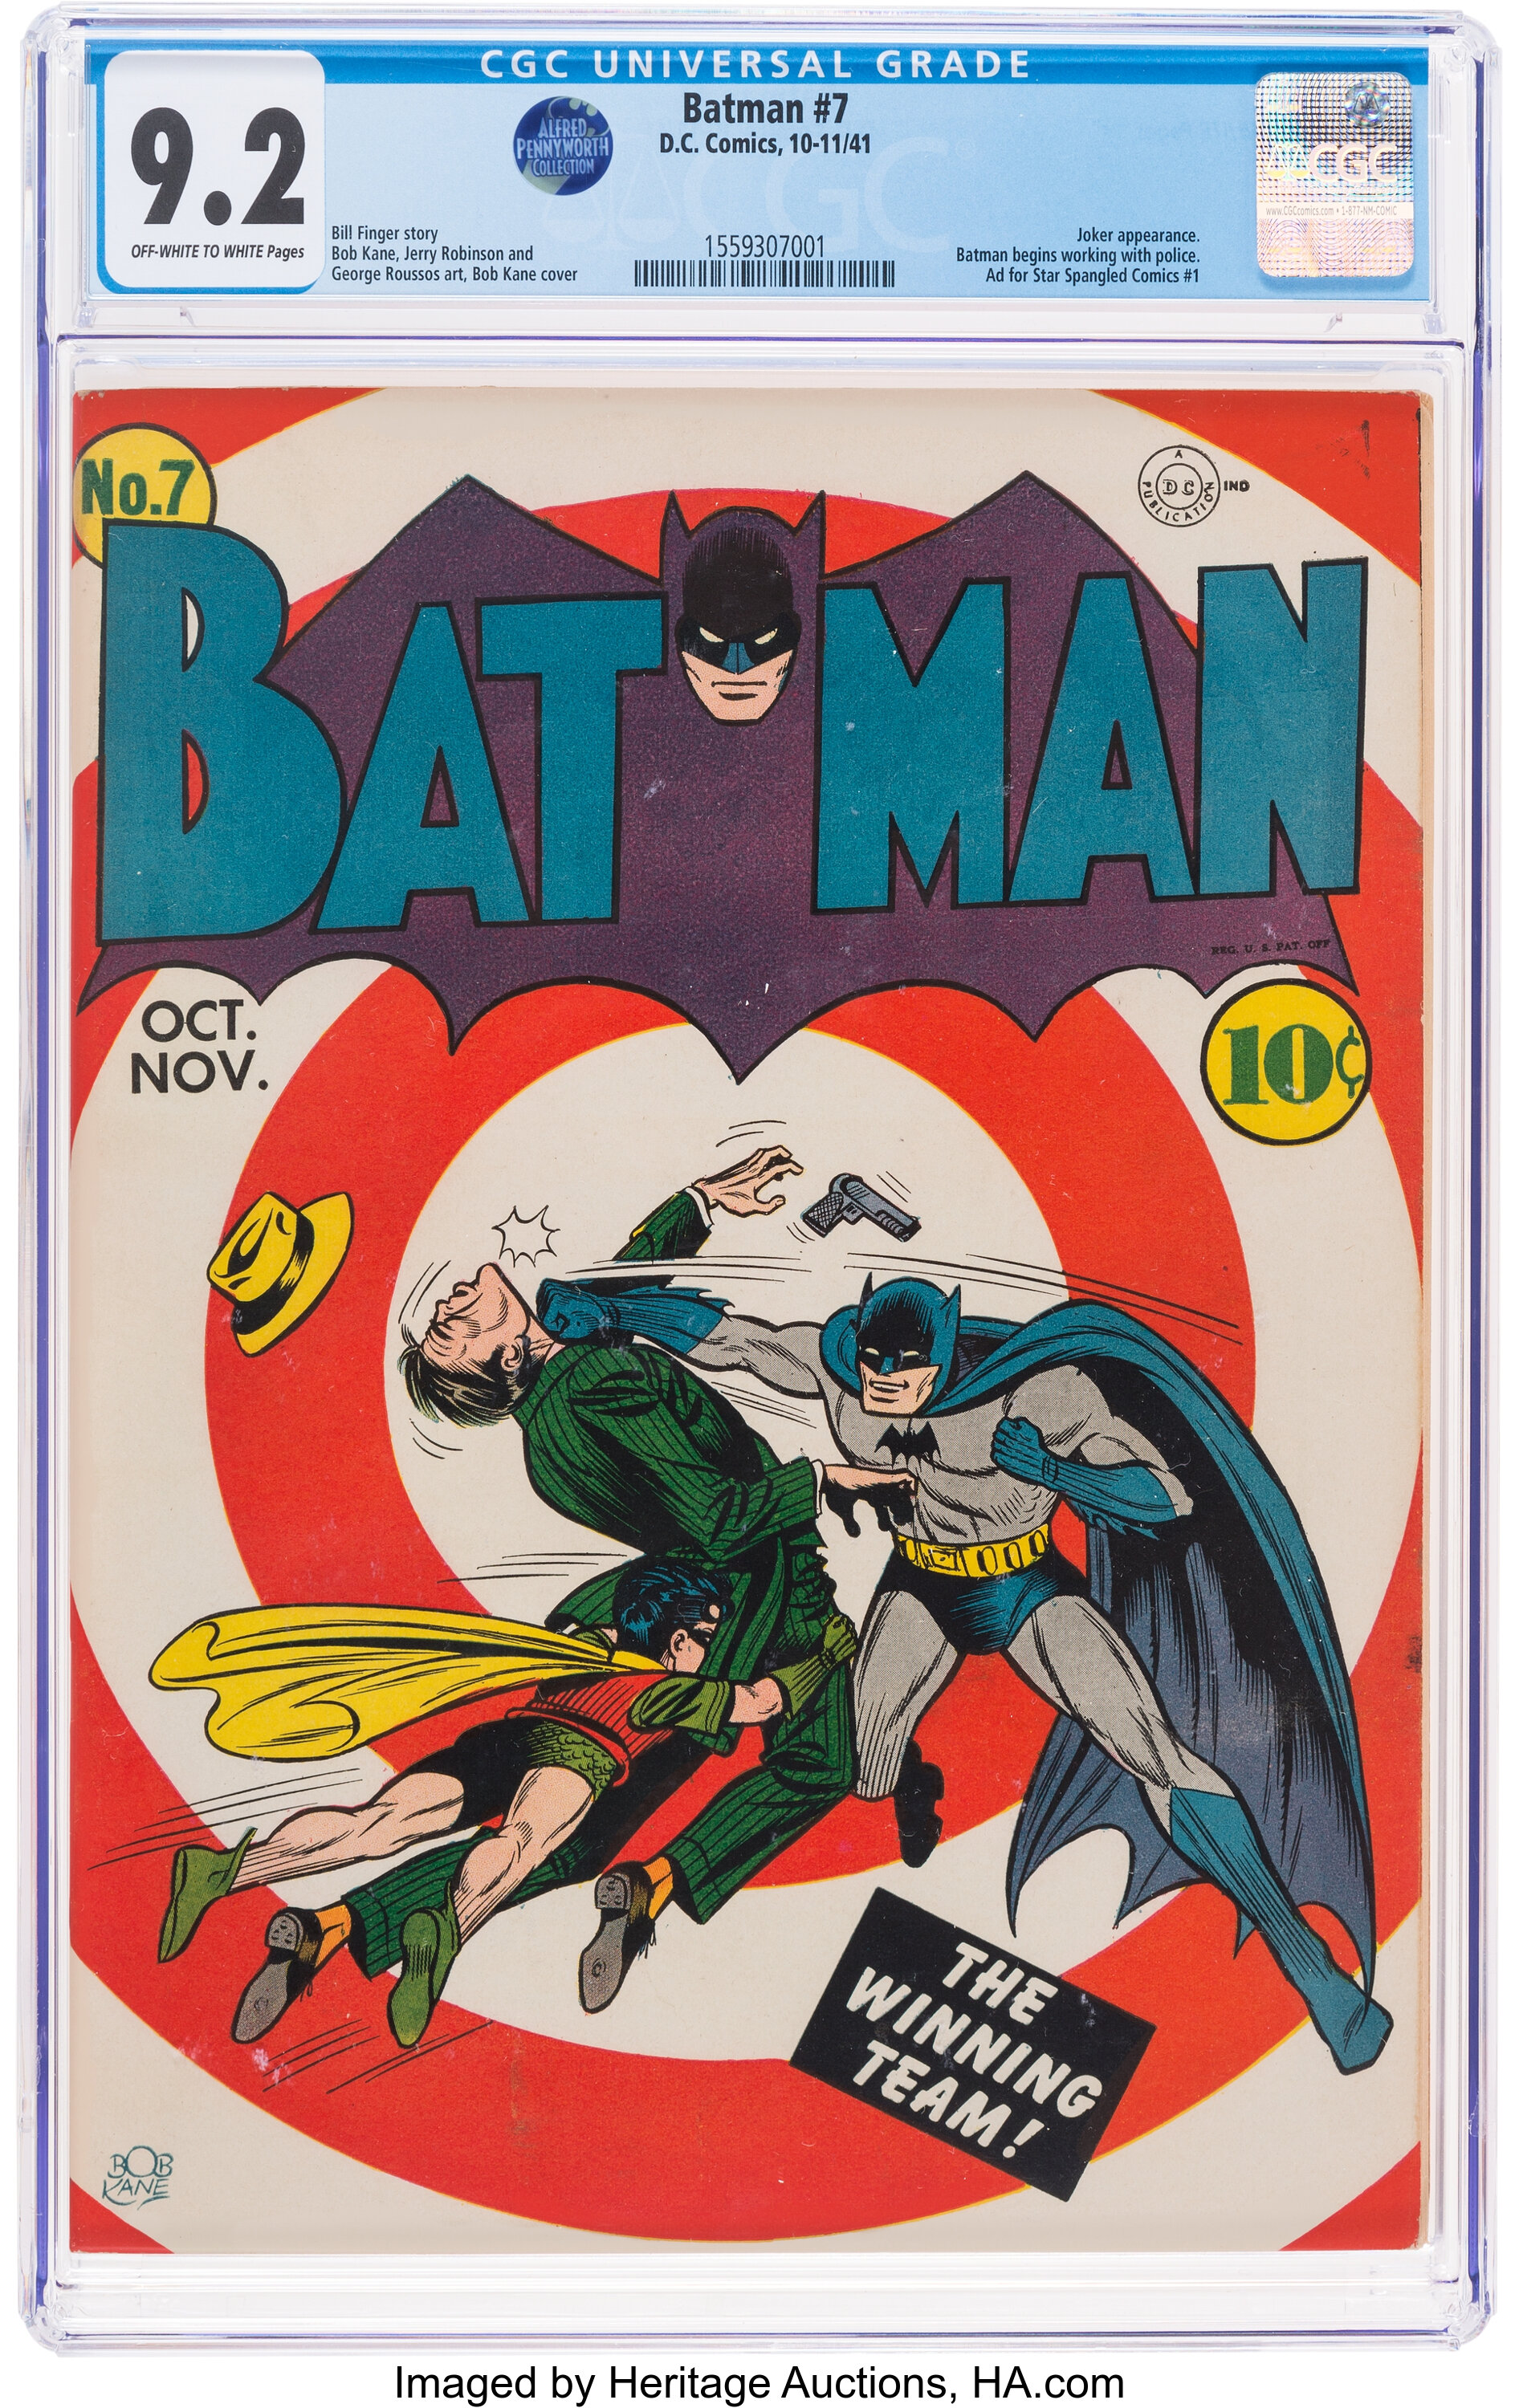 How Much Is Batman #7 Worth? Browse Comic Prices | Heritage Auctions